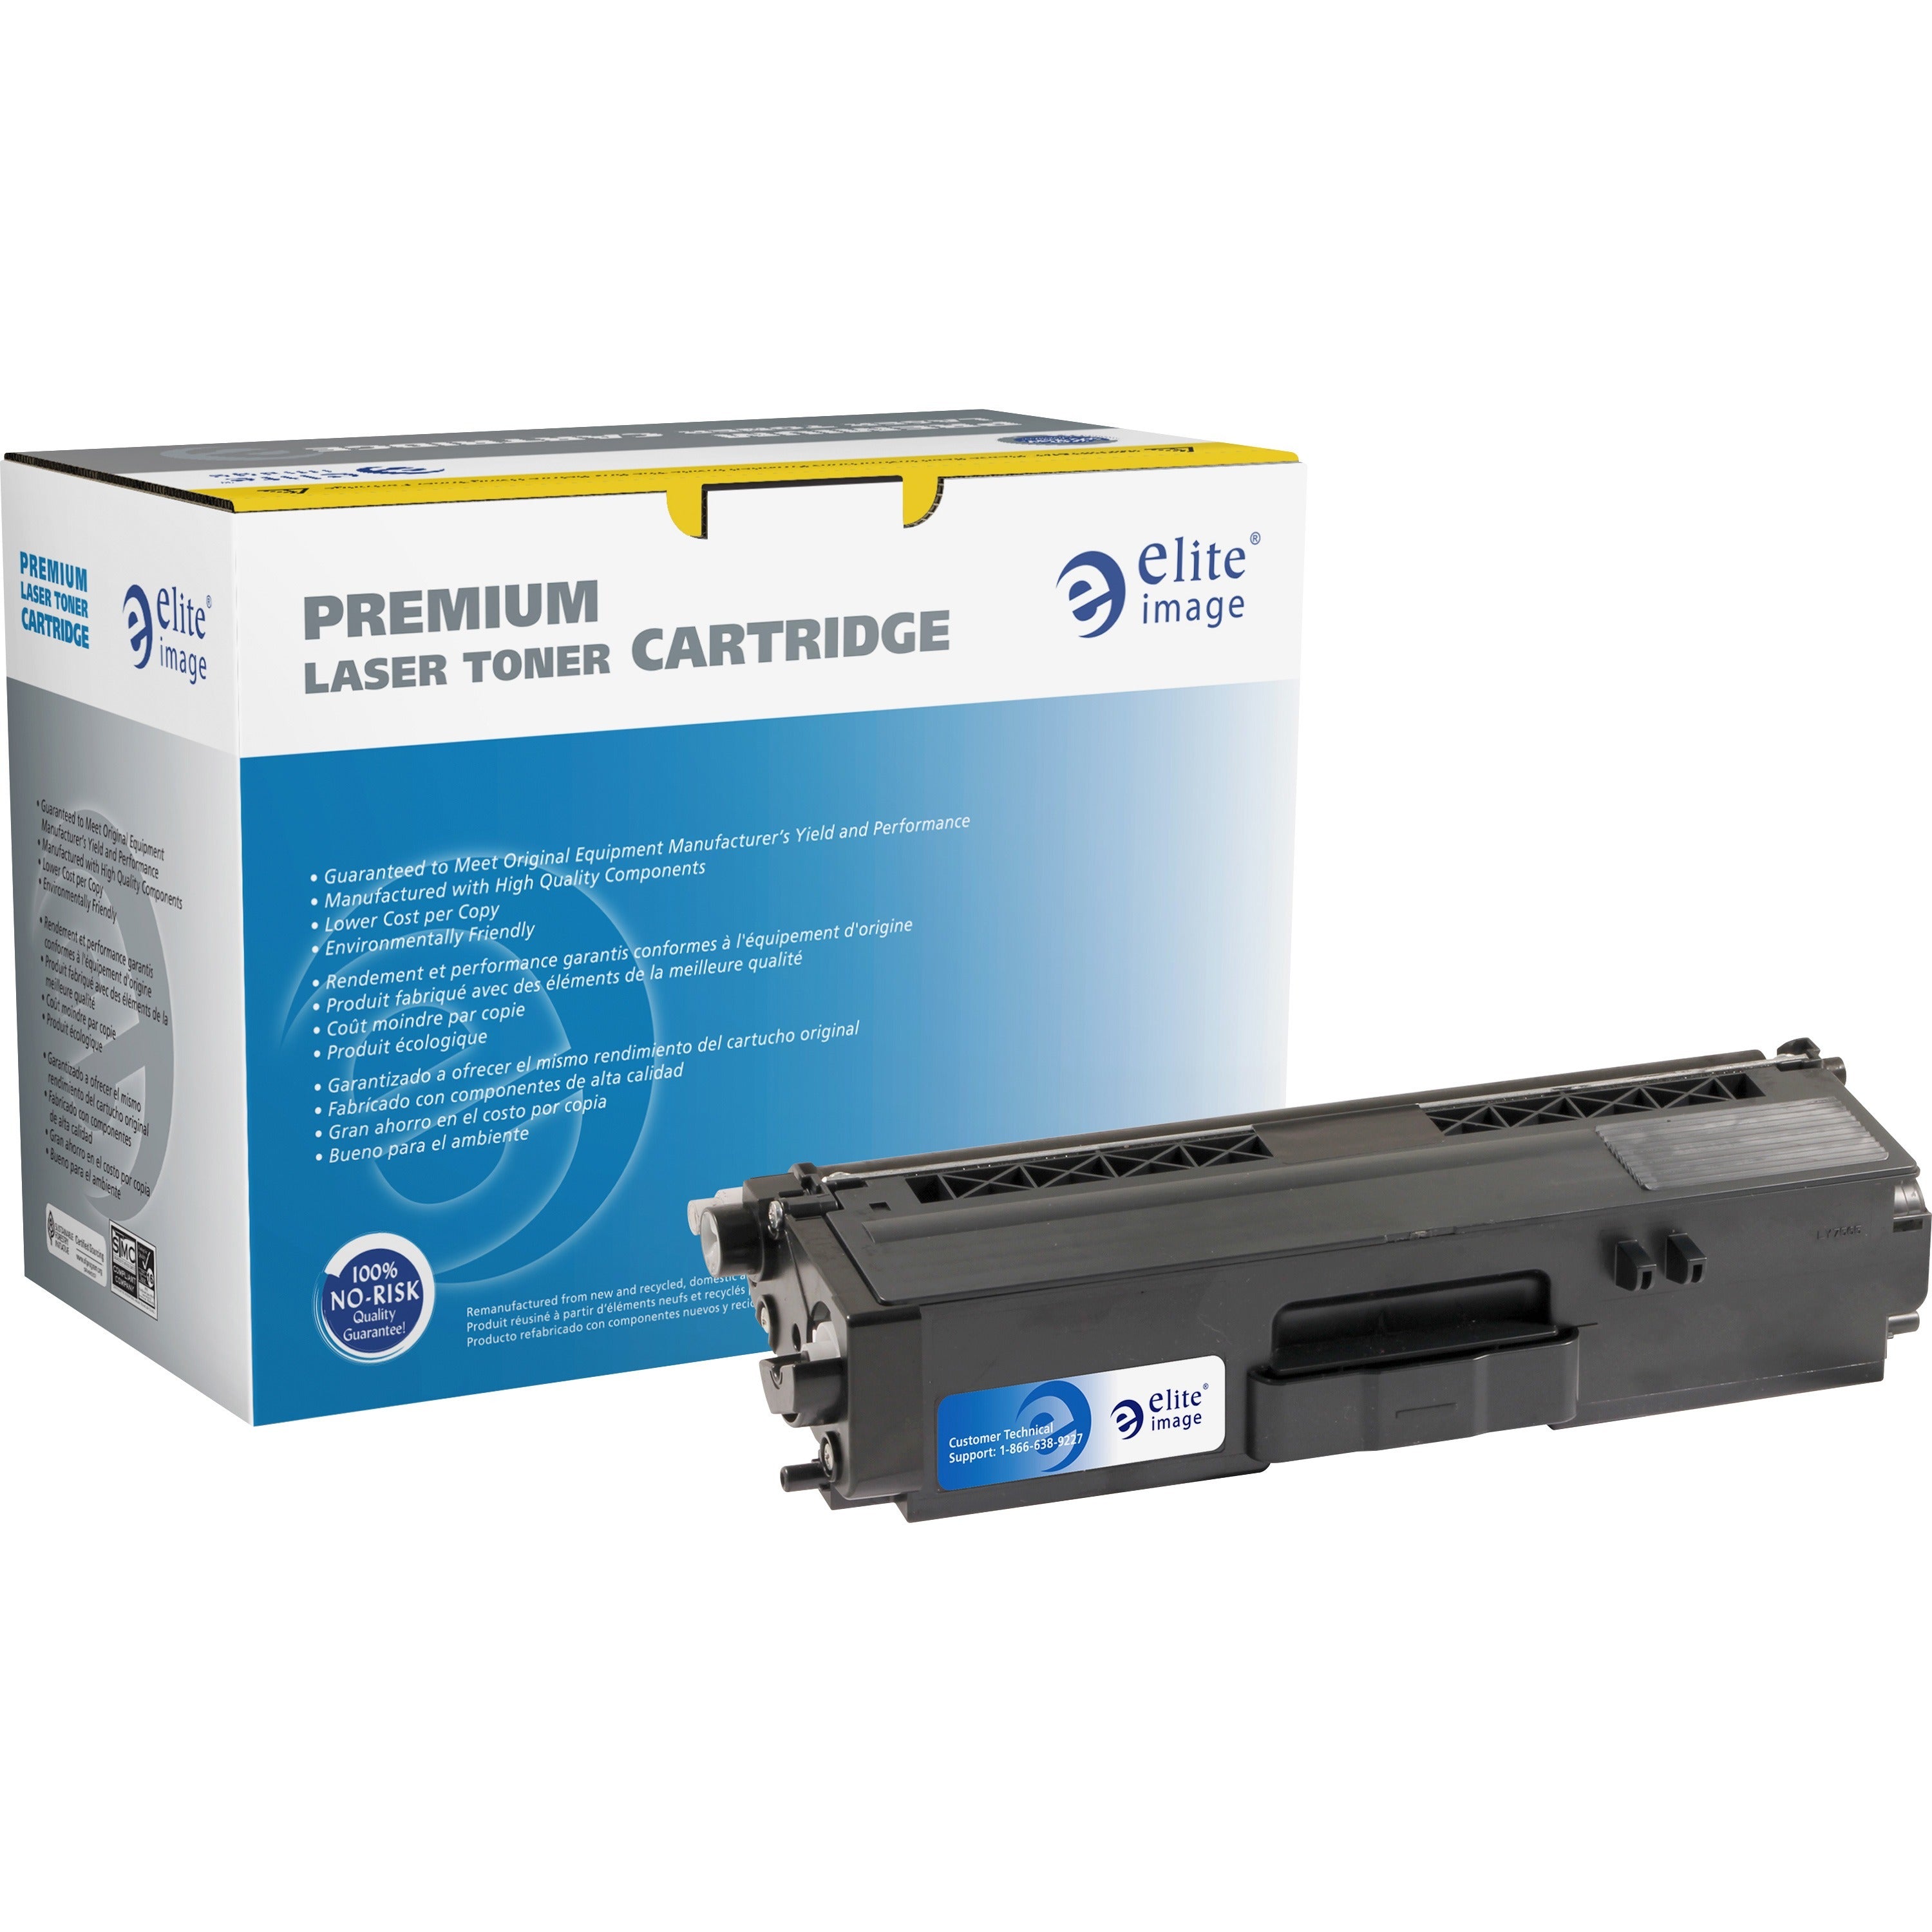 Elite Image Remanufactured Laser Toner Cartridge - Alternative for Brother TN339 - Yellow - 1 Each - 6000 Pages